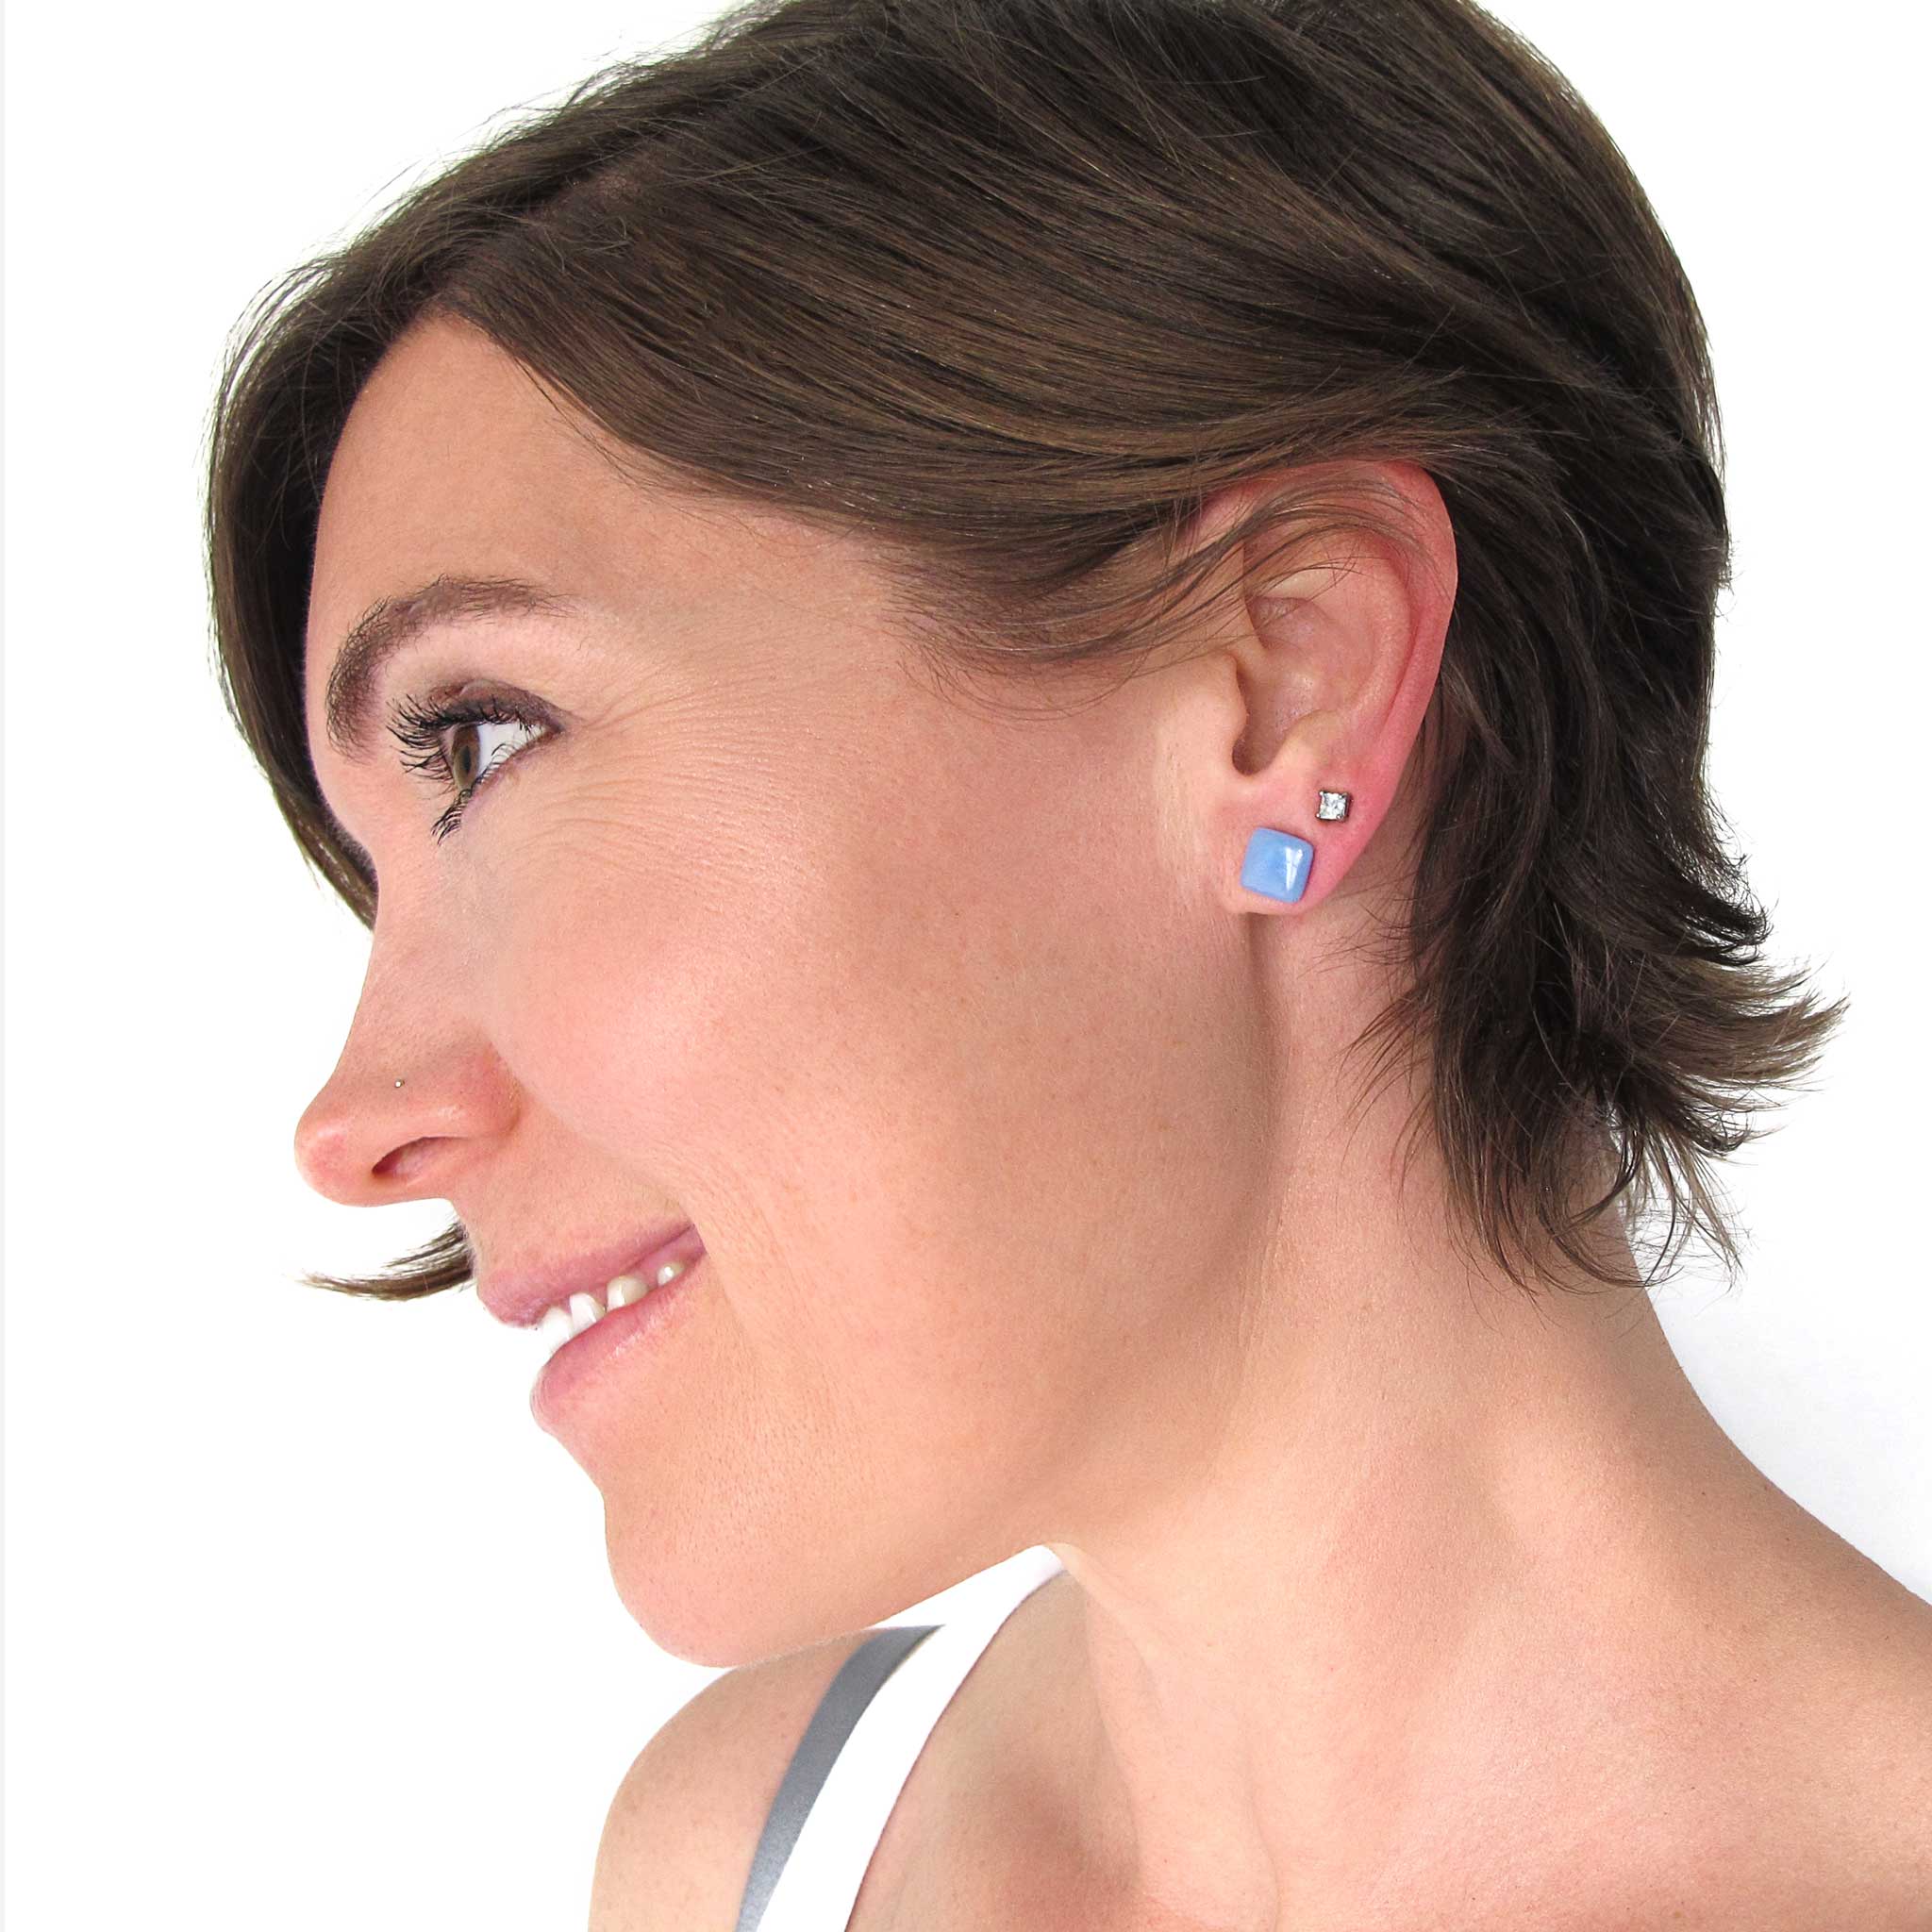 Rally Stud Earring - Square, Various Colors